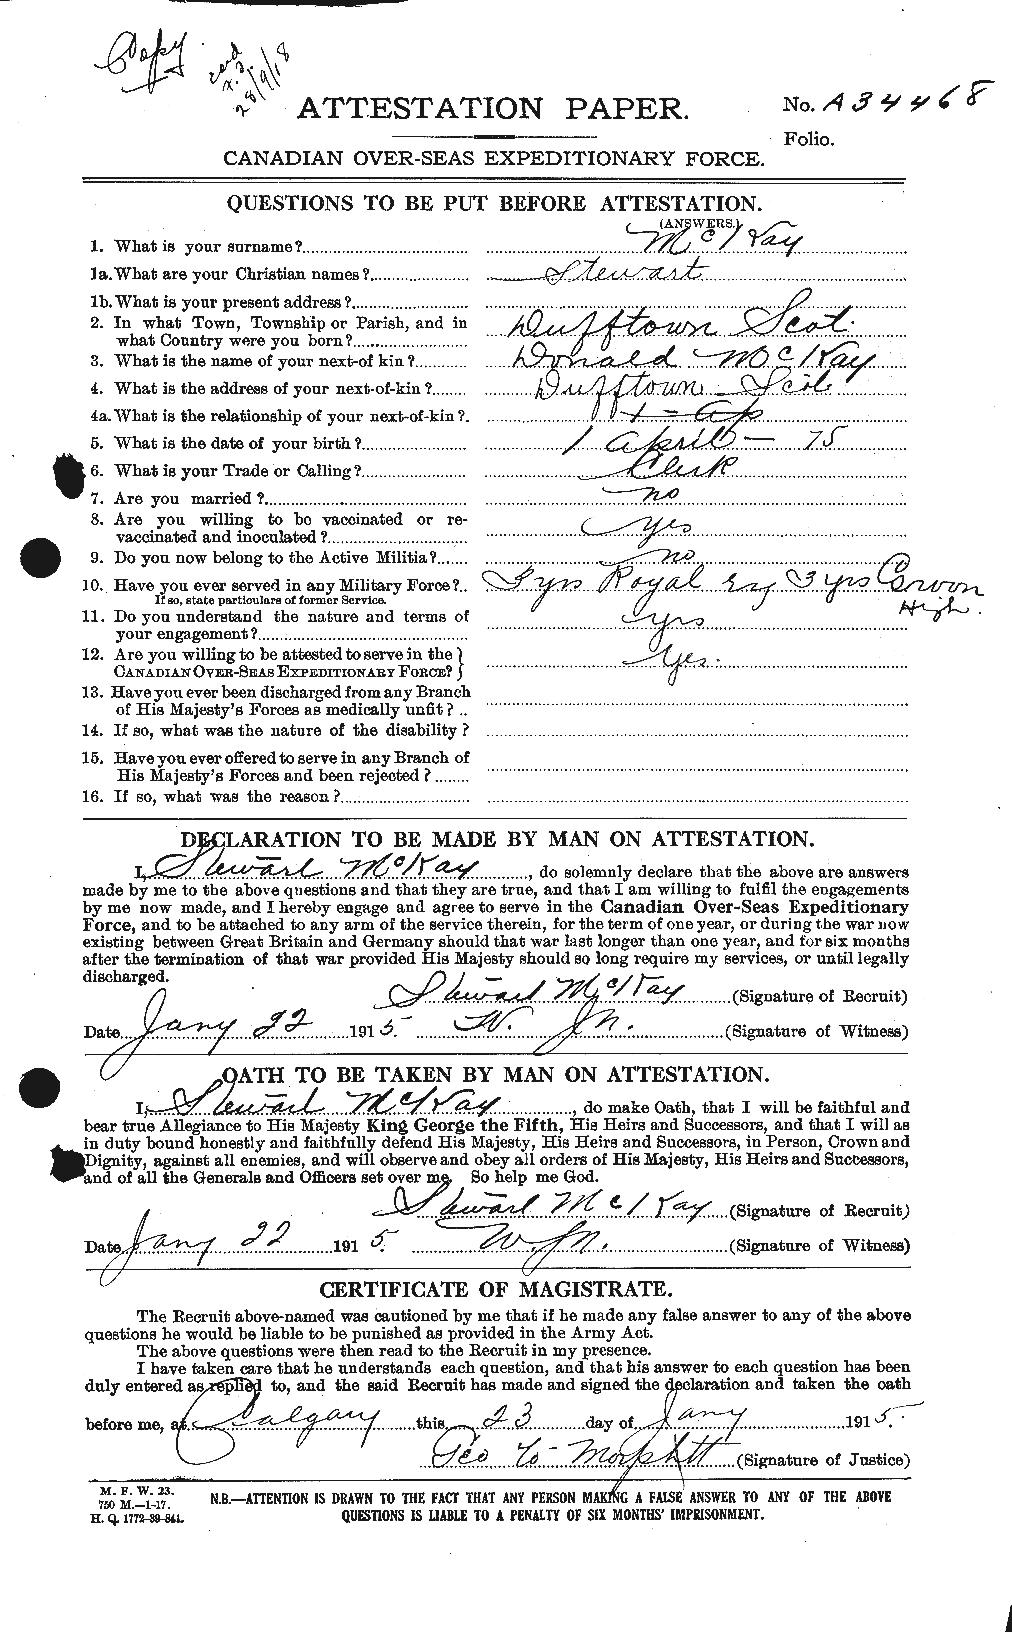 Personnel Records of the First World War - CEF 530148a